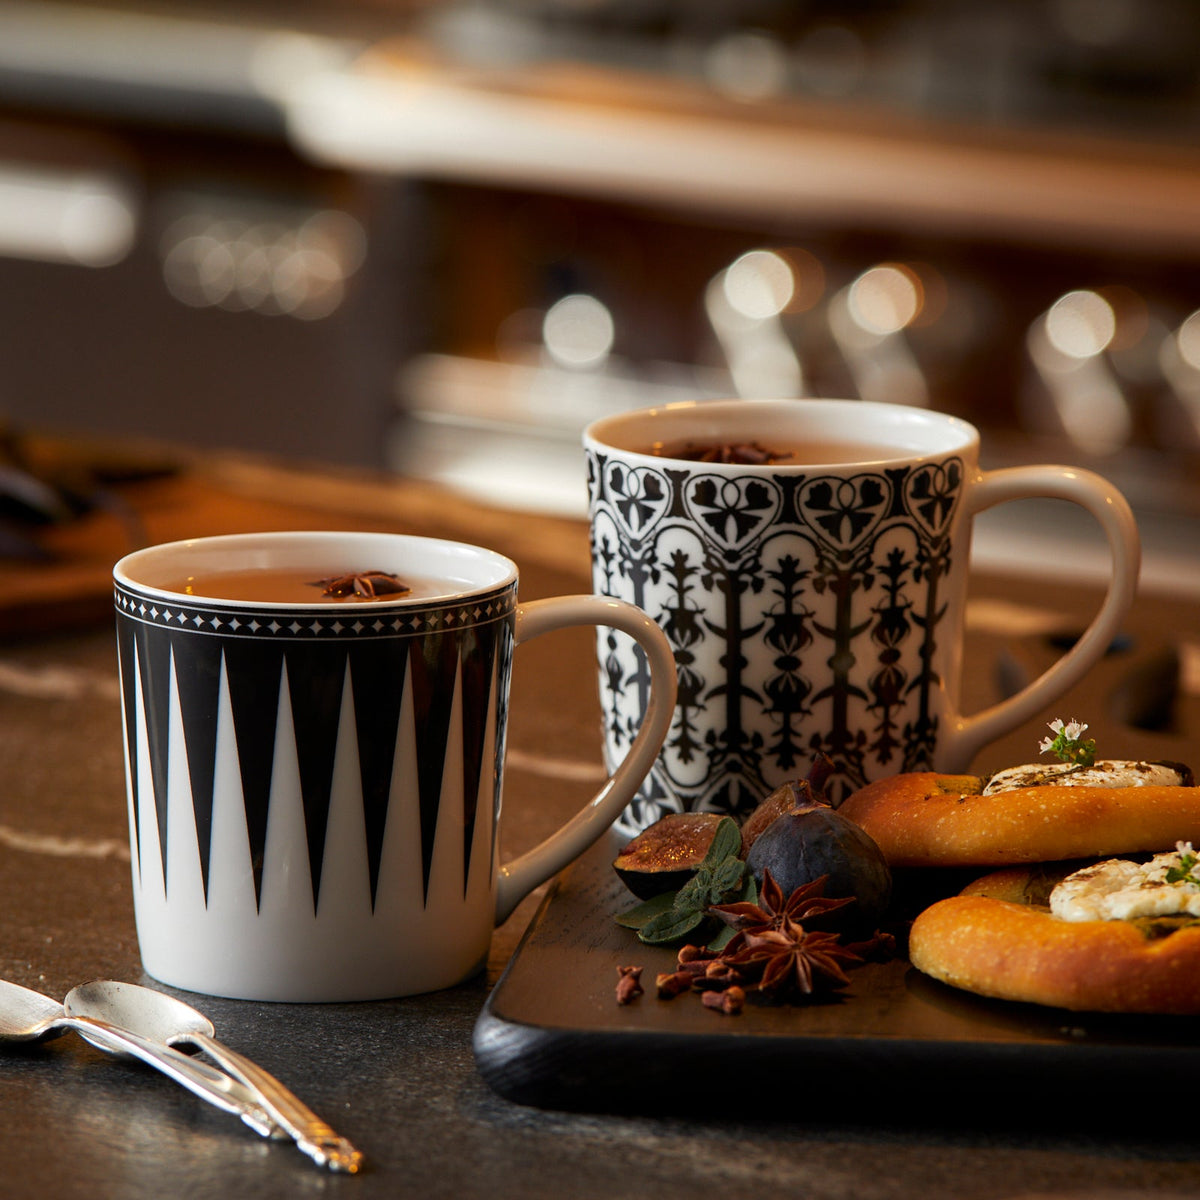 Two Marrakech Mugs from Caskata Artisanal Home with black and white patterns, crafted from high-fired porcelain, are filled with tea and placed on a table next to a tray with pastries, figs, and garnishes. Silver spoons rest nearby. The background shows a blurred kitchen setting.